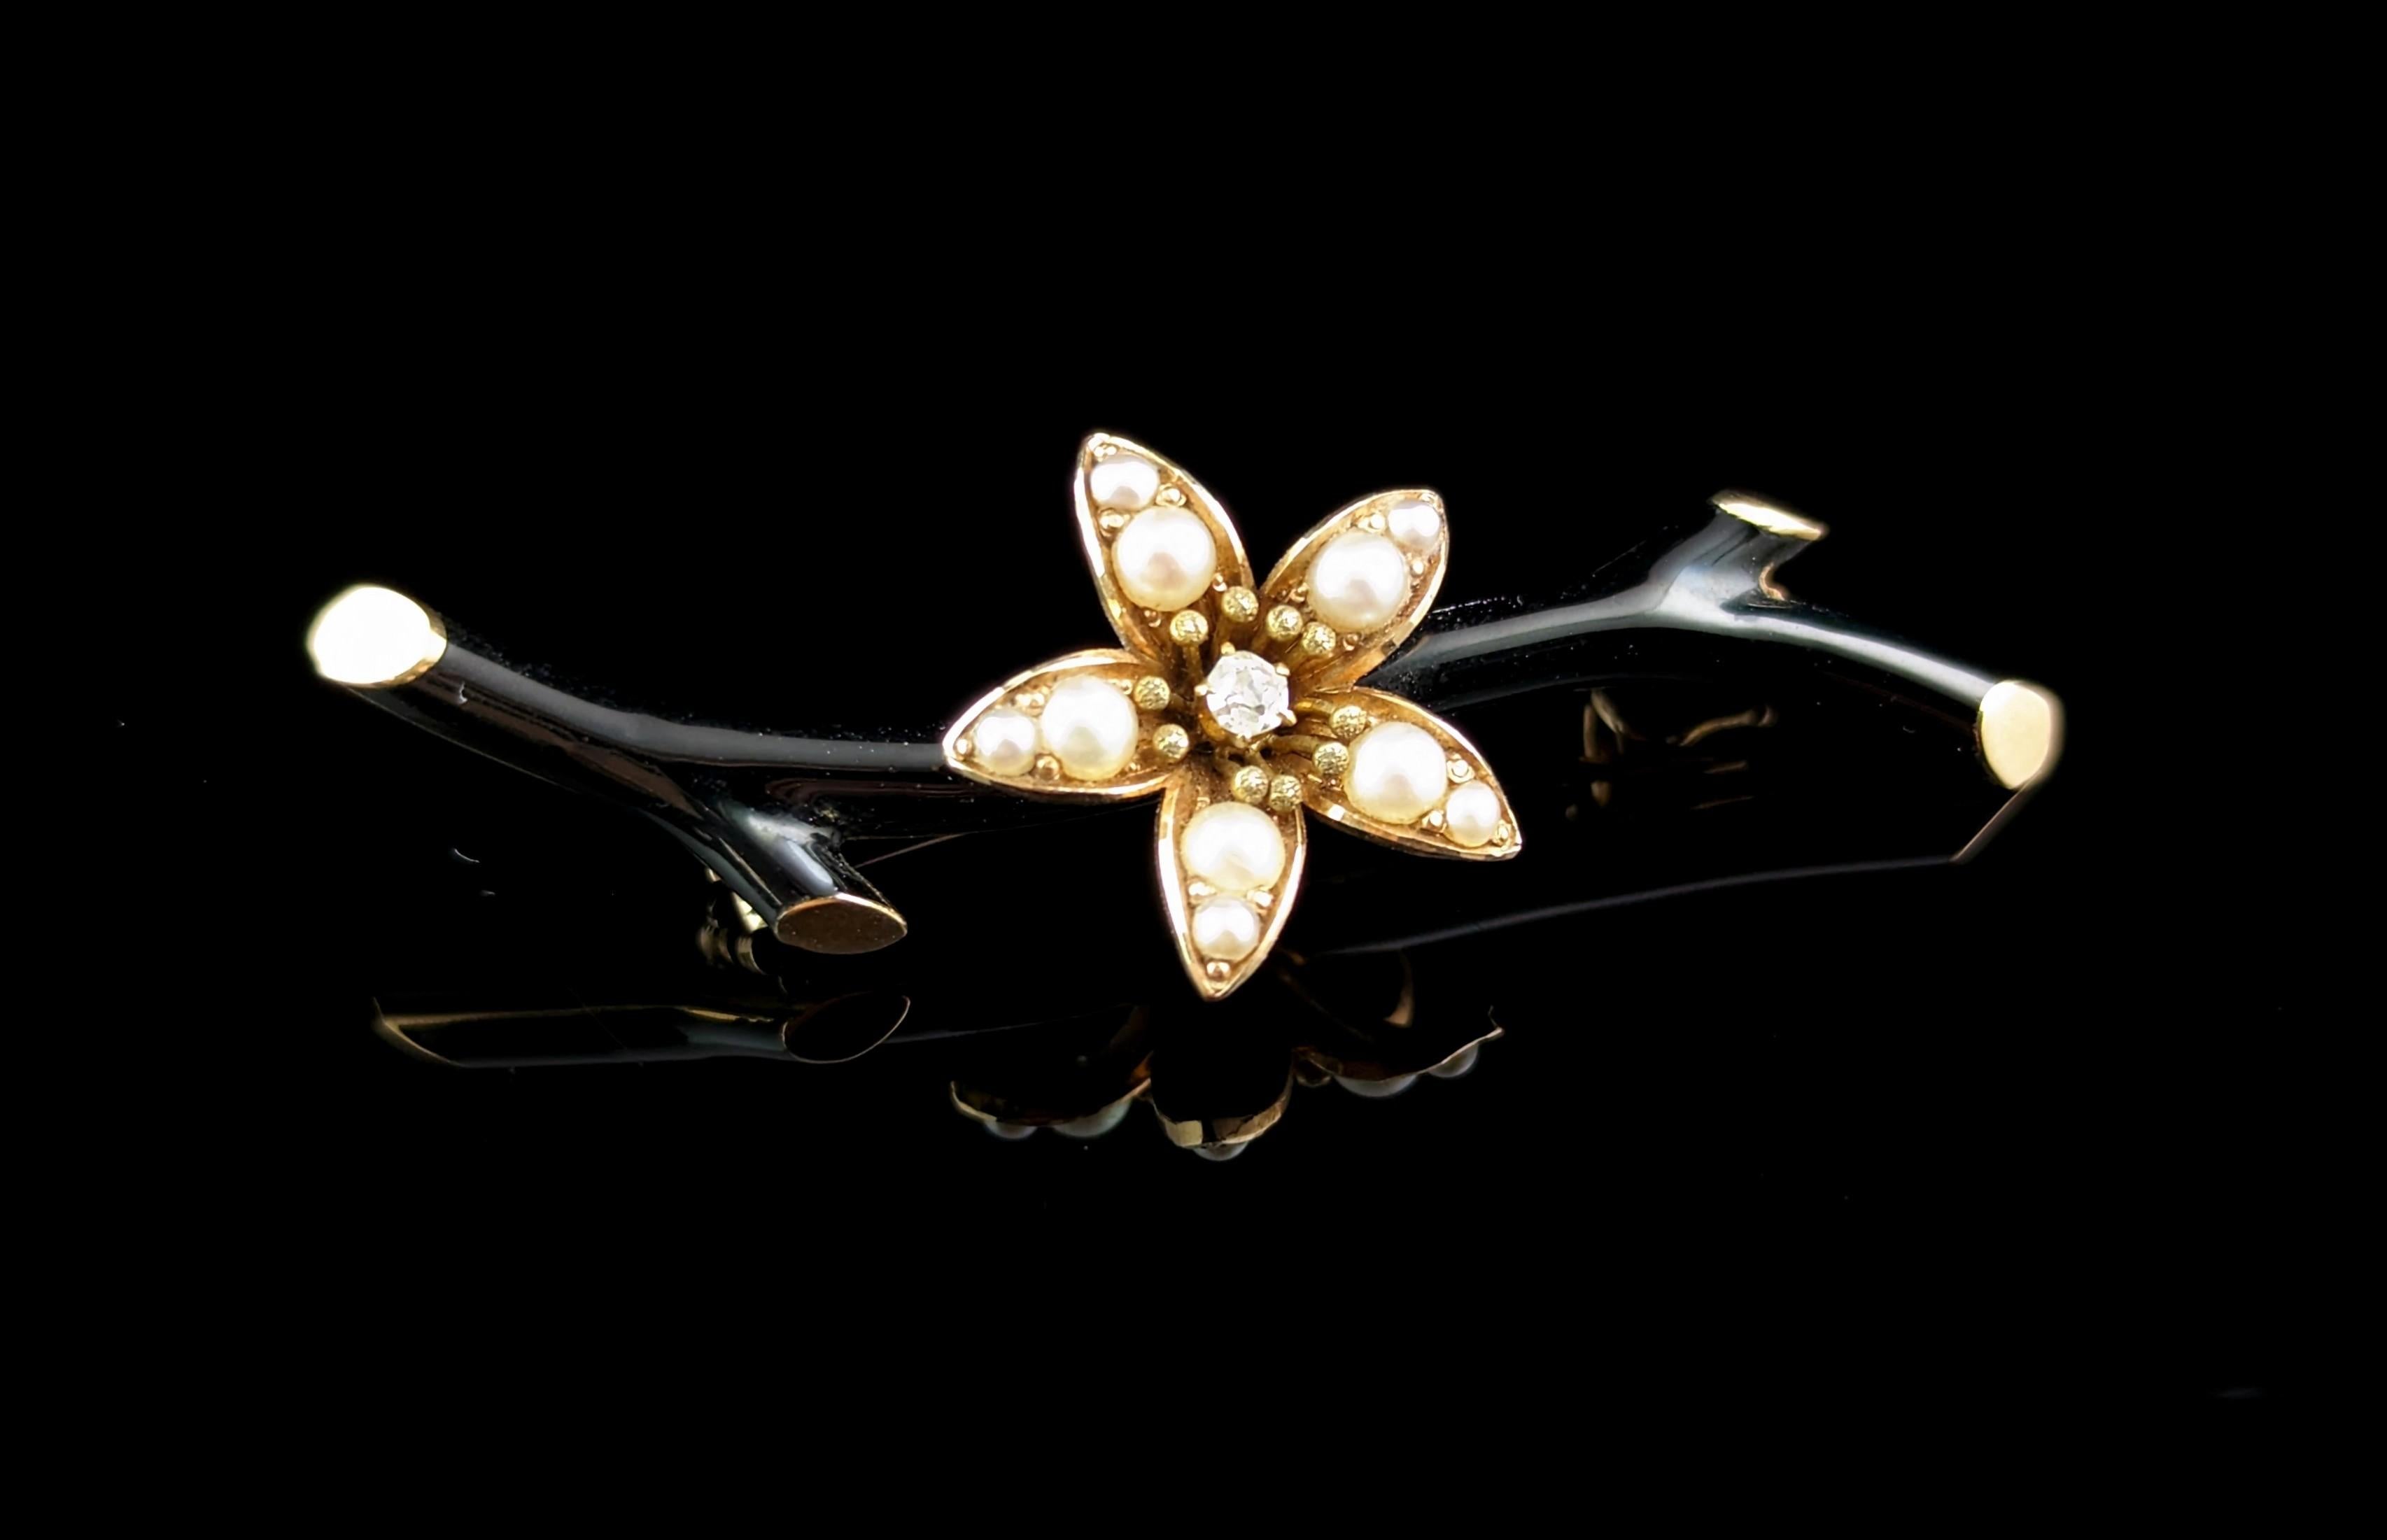 This is truly one of the most beautiful antique mourning brooches I have seen, so elegant and stylish, it's hard to believe that it is over a hundred years old.

Crafted in 15ct yellow gold it is designed as a branch with a single flower to the